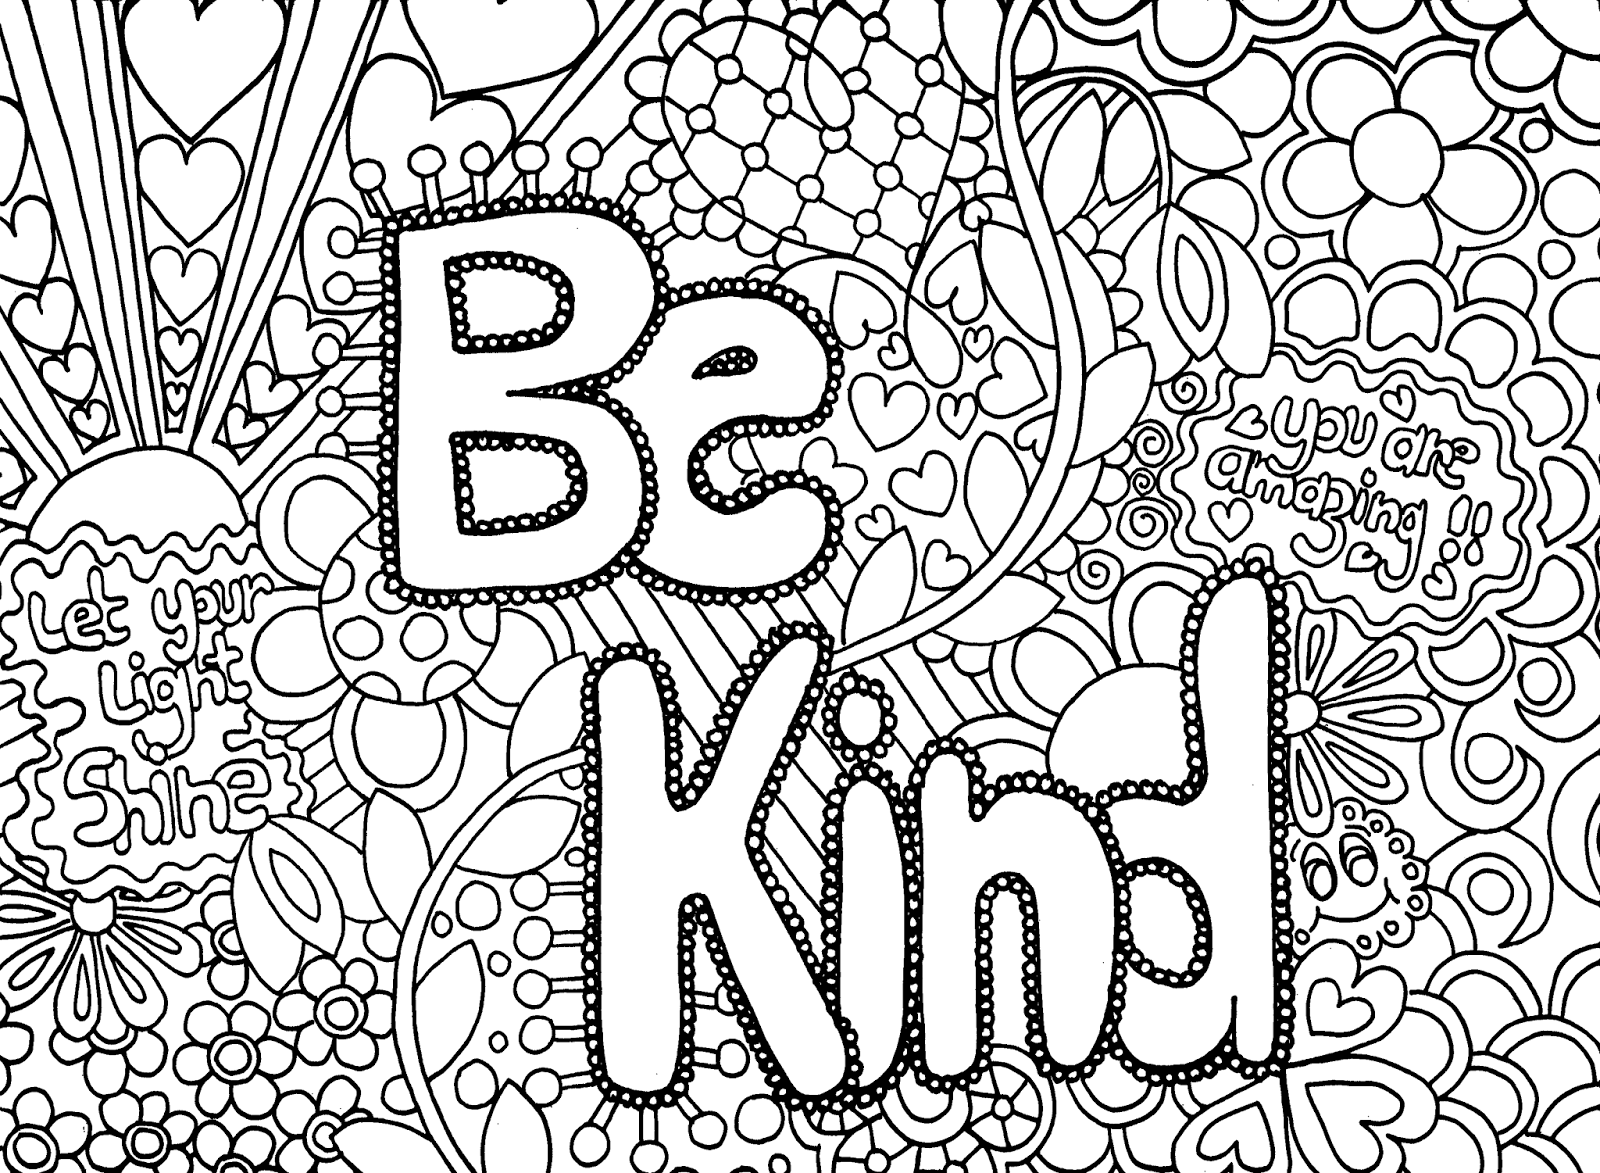 Coloring Pages To Print For Teenagers   Only Coloring Pages ...